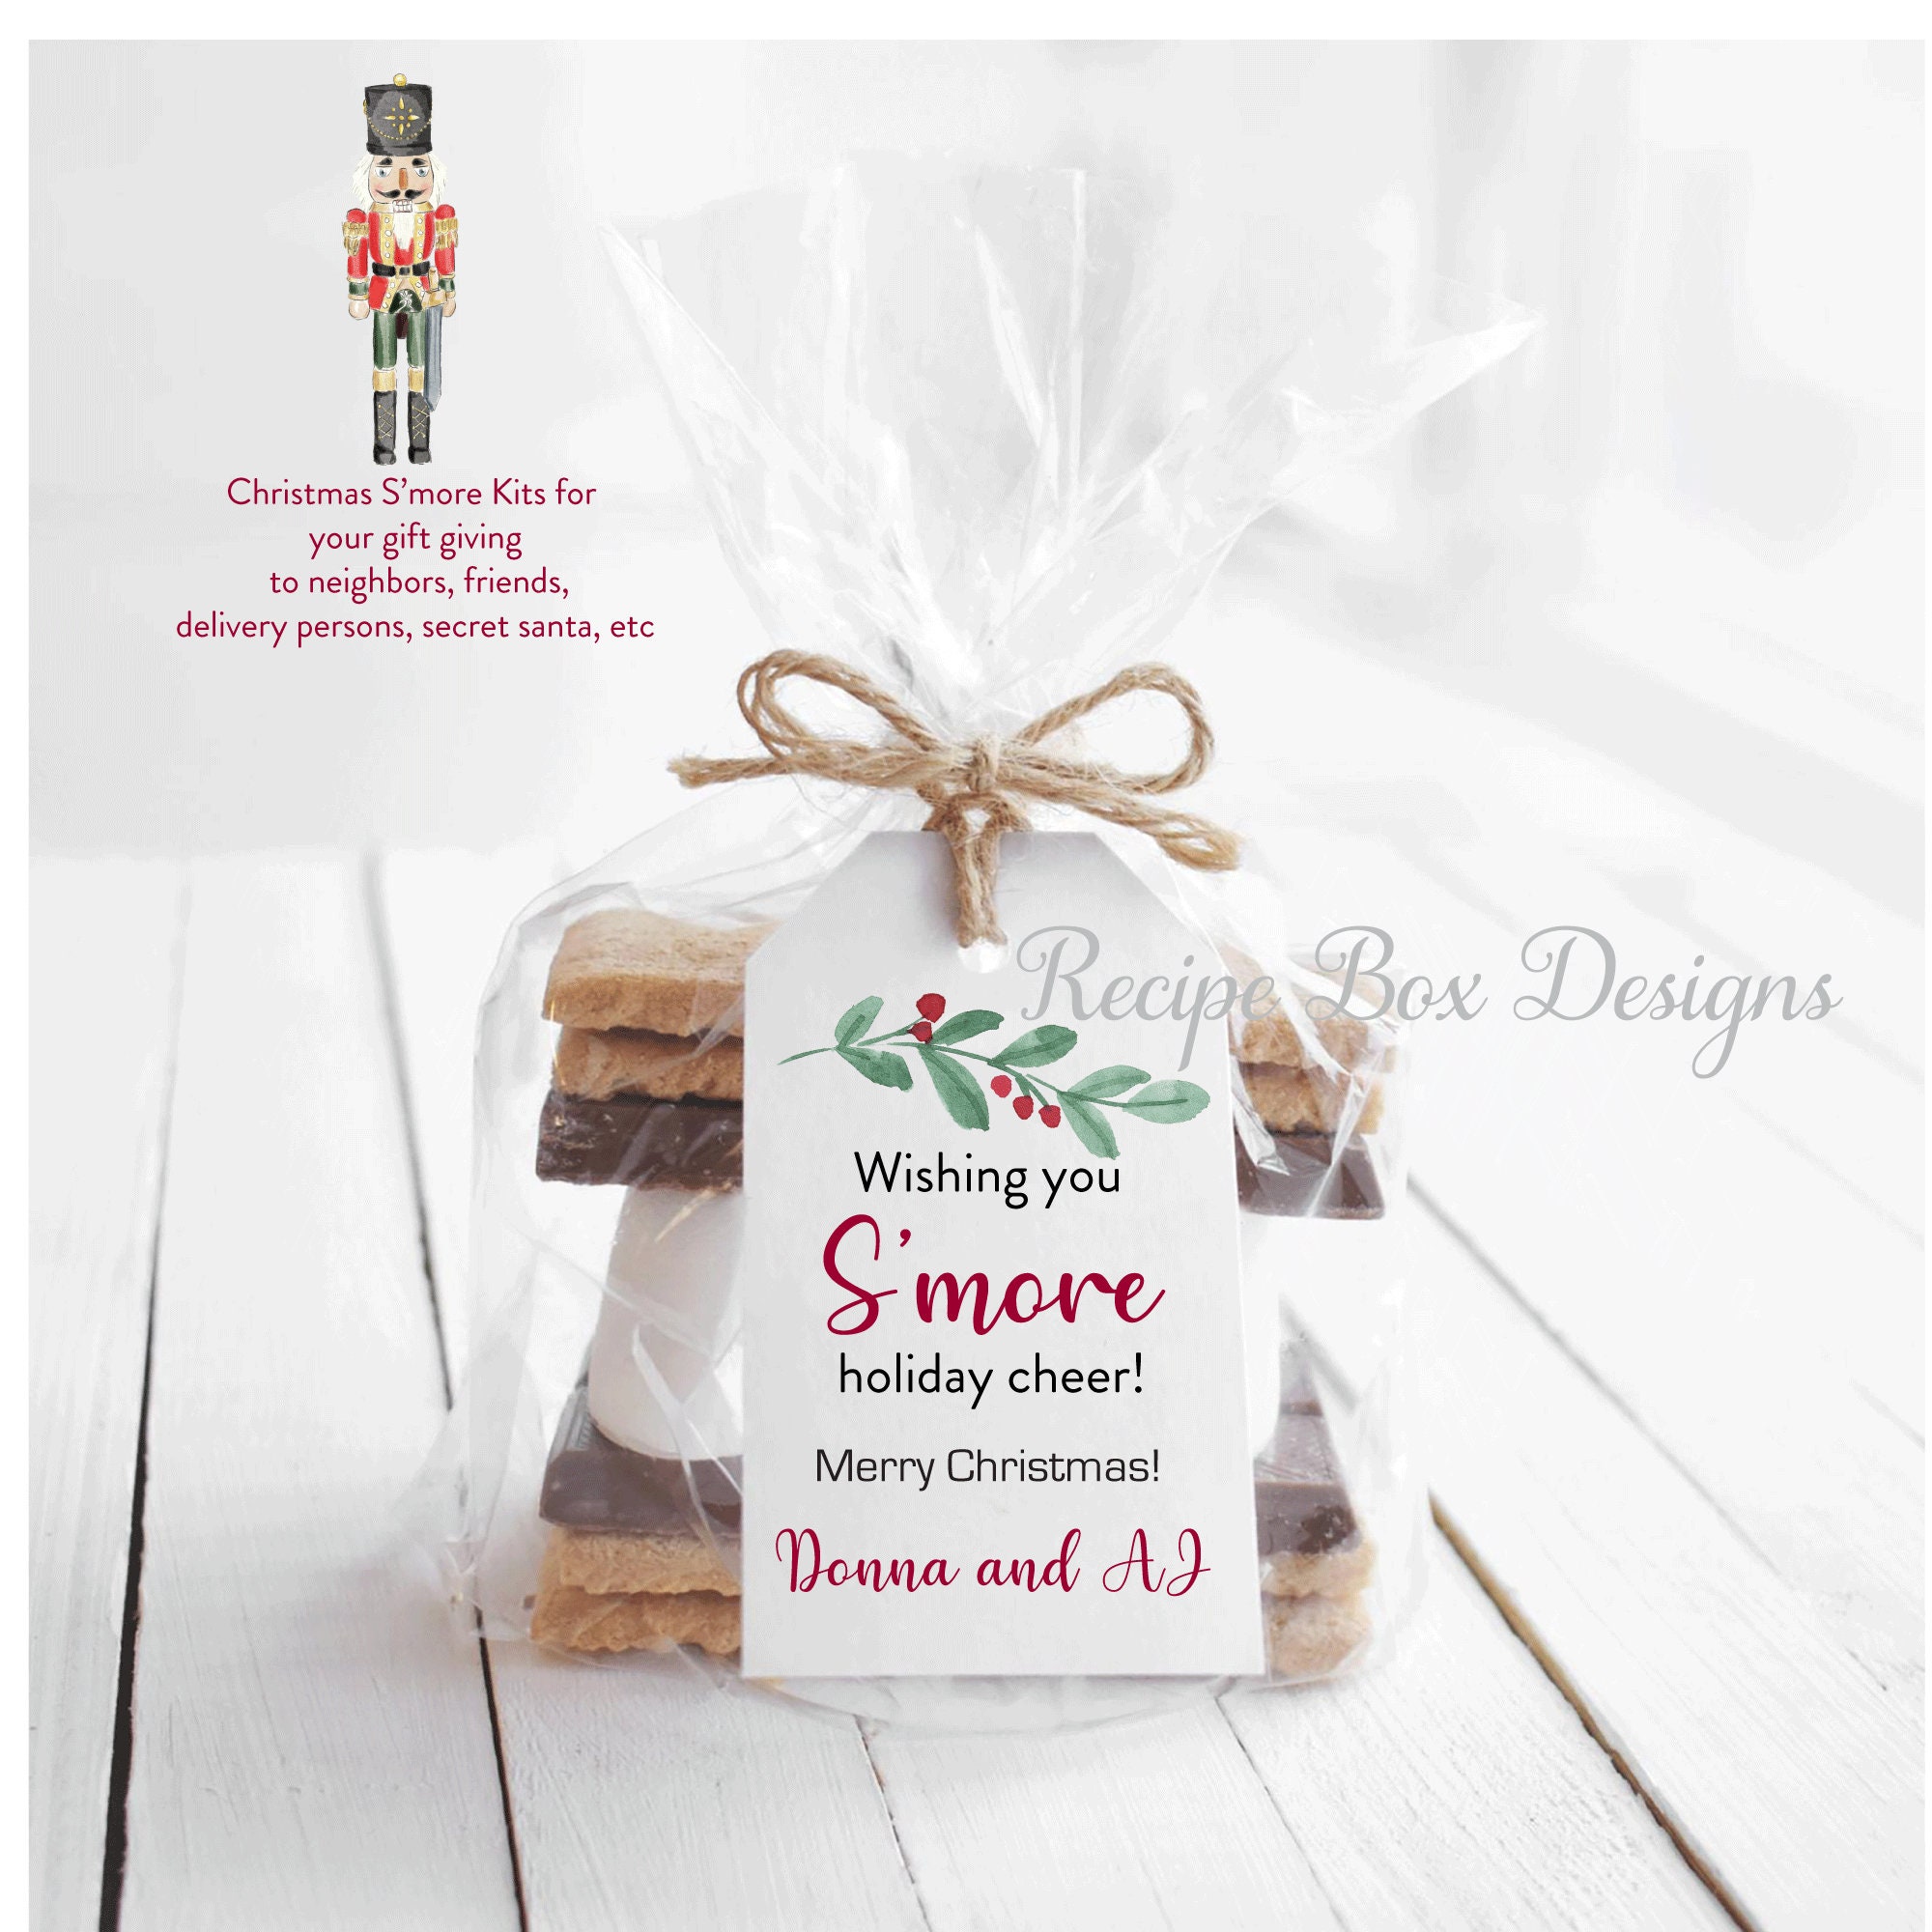 DIY smores favors  The perfect gift for your guest on a winter wonderland  party